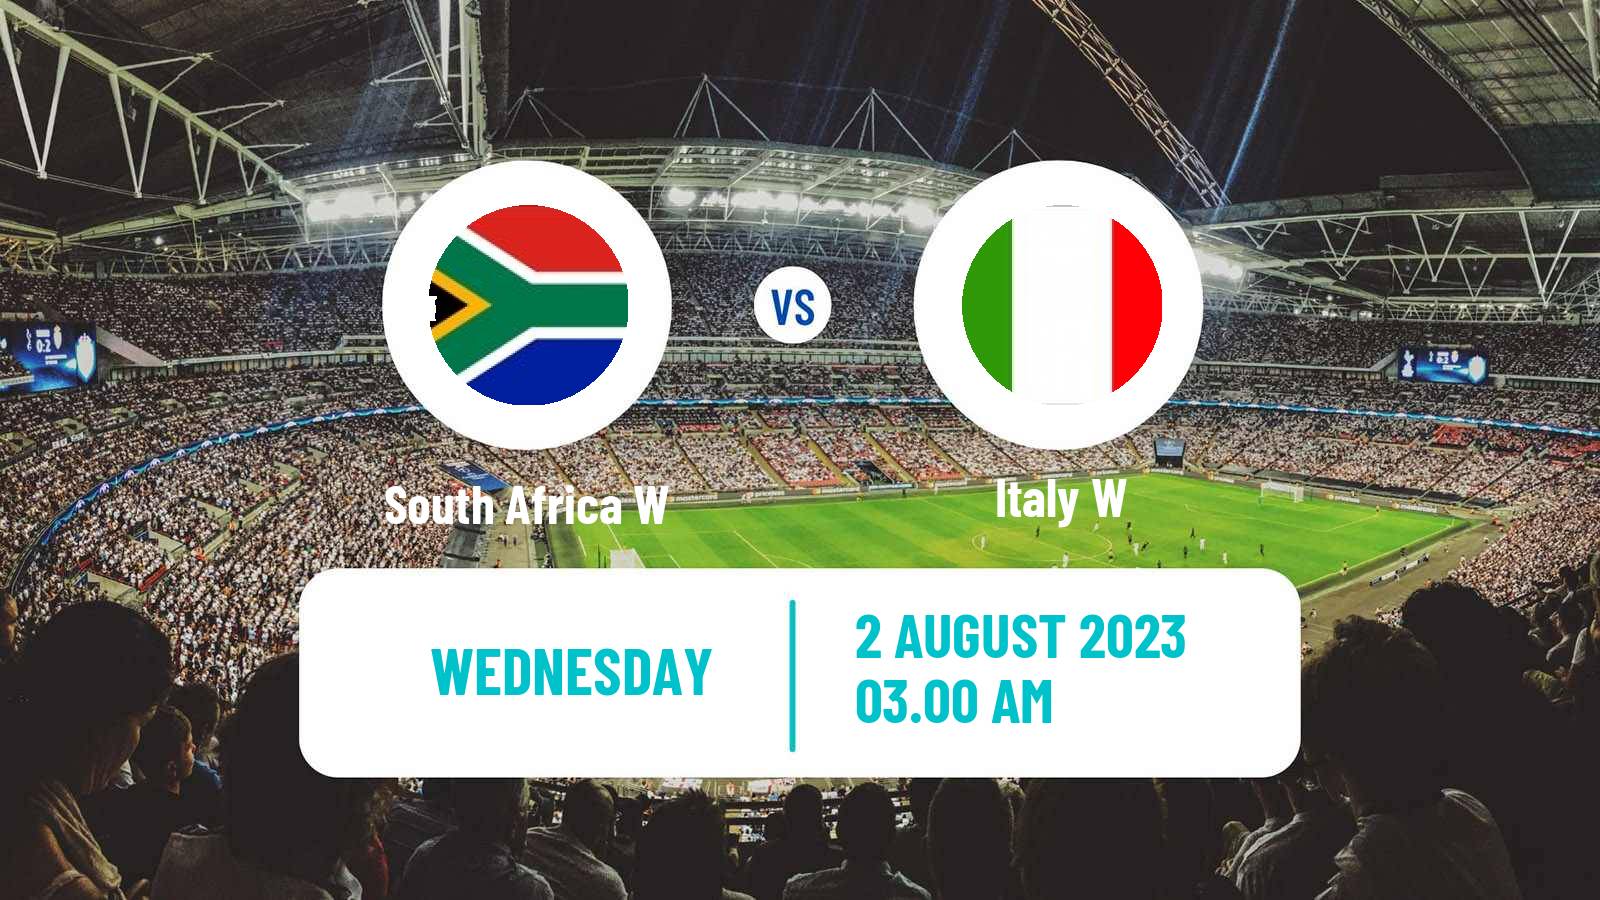 Soccer FIFA World Cup Women South Africa W - Italy W